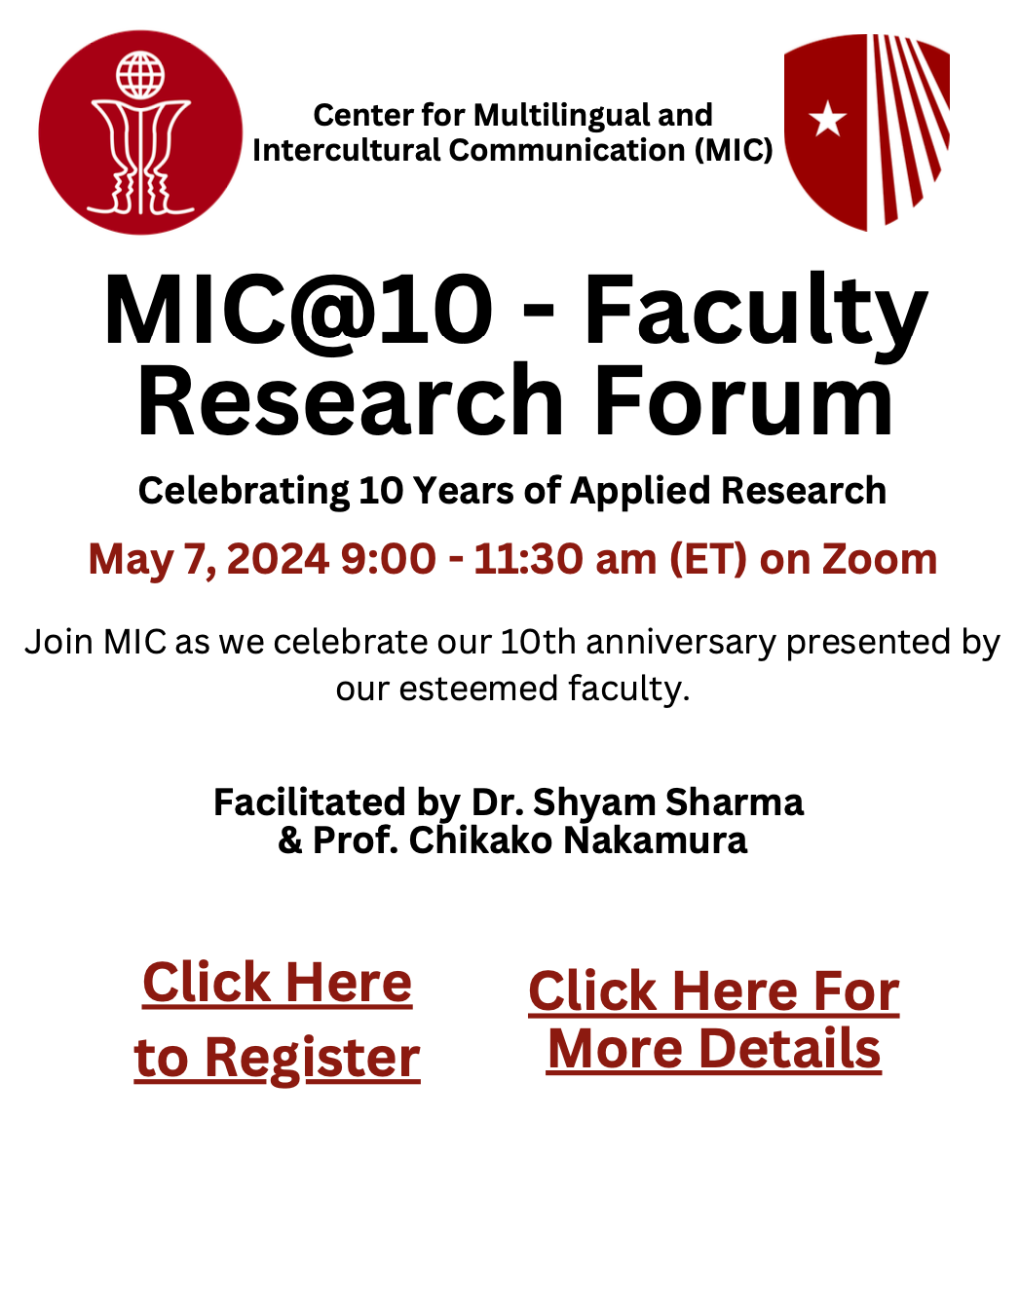 research forum flyer